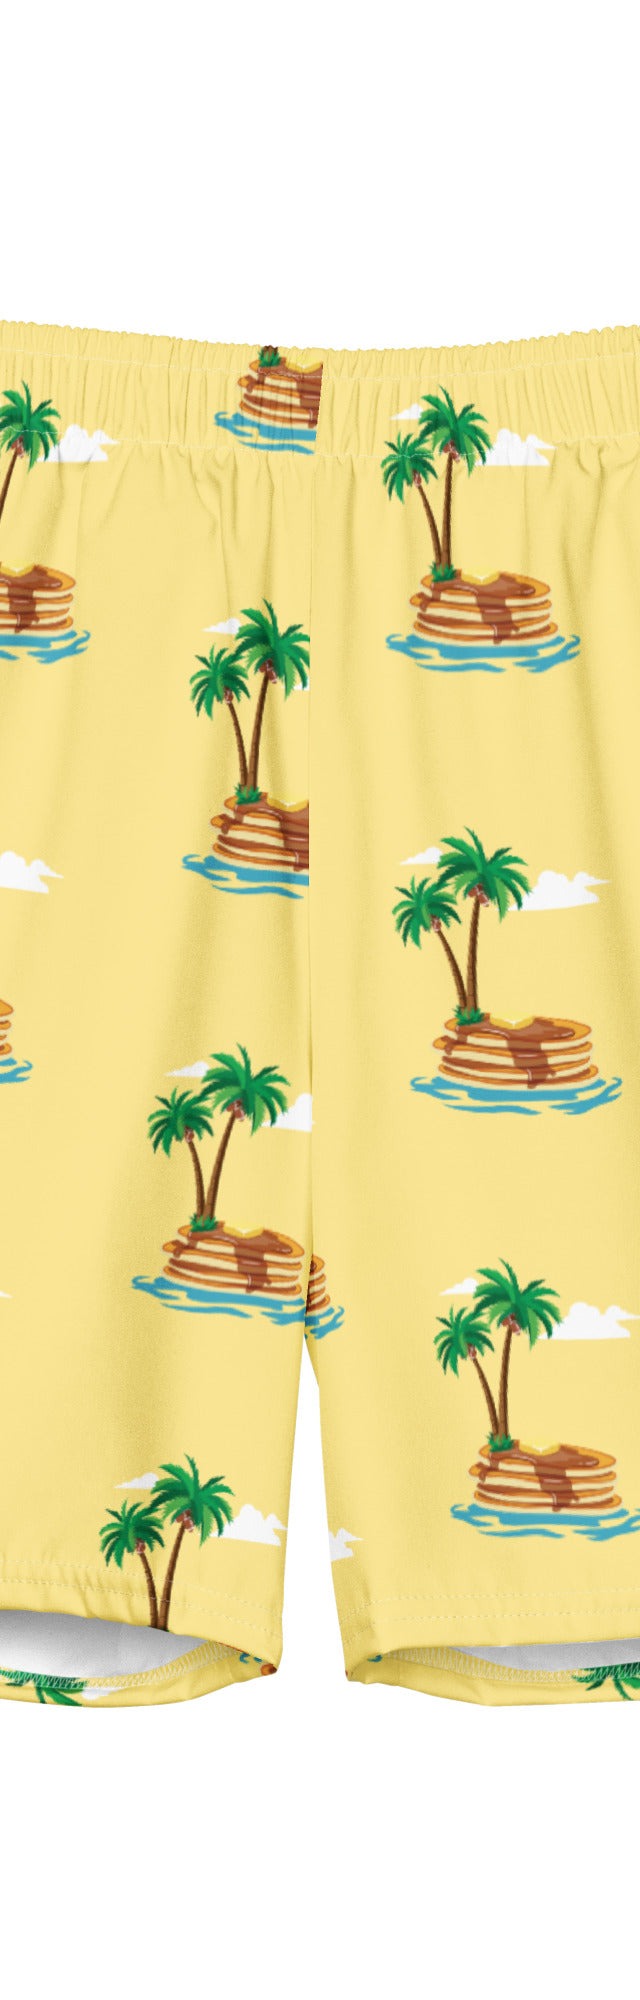 Pancakes and Palm Trees - Yellow